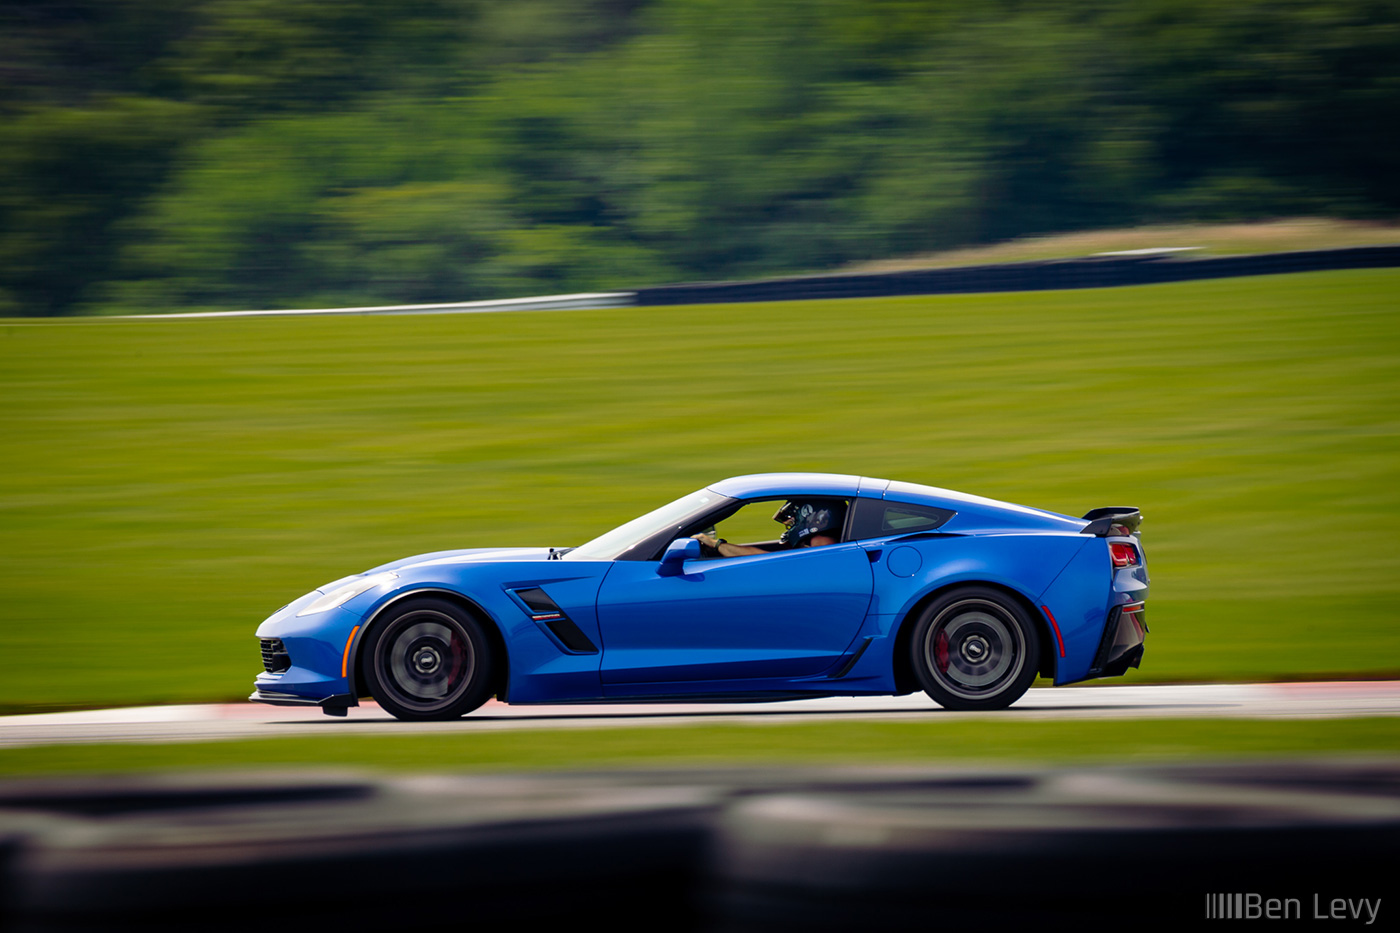 Jack (from SavageGeese) driving his Corvette Grand Sport at Autobahn Country Club